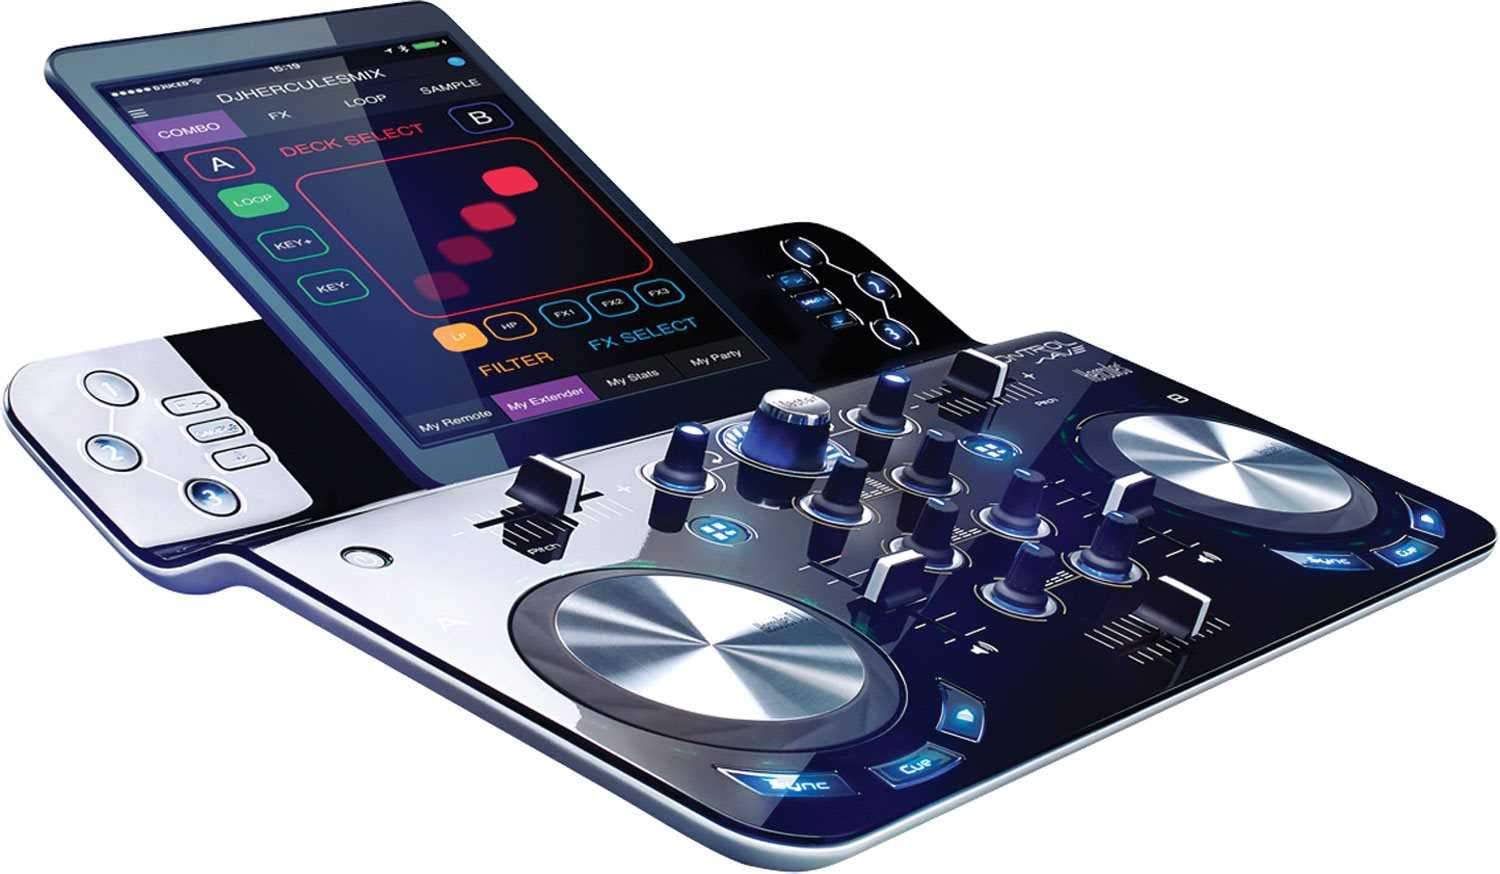 Hercules ControlWave M3 DJ Controller - ProSound and Stage Lighting